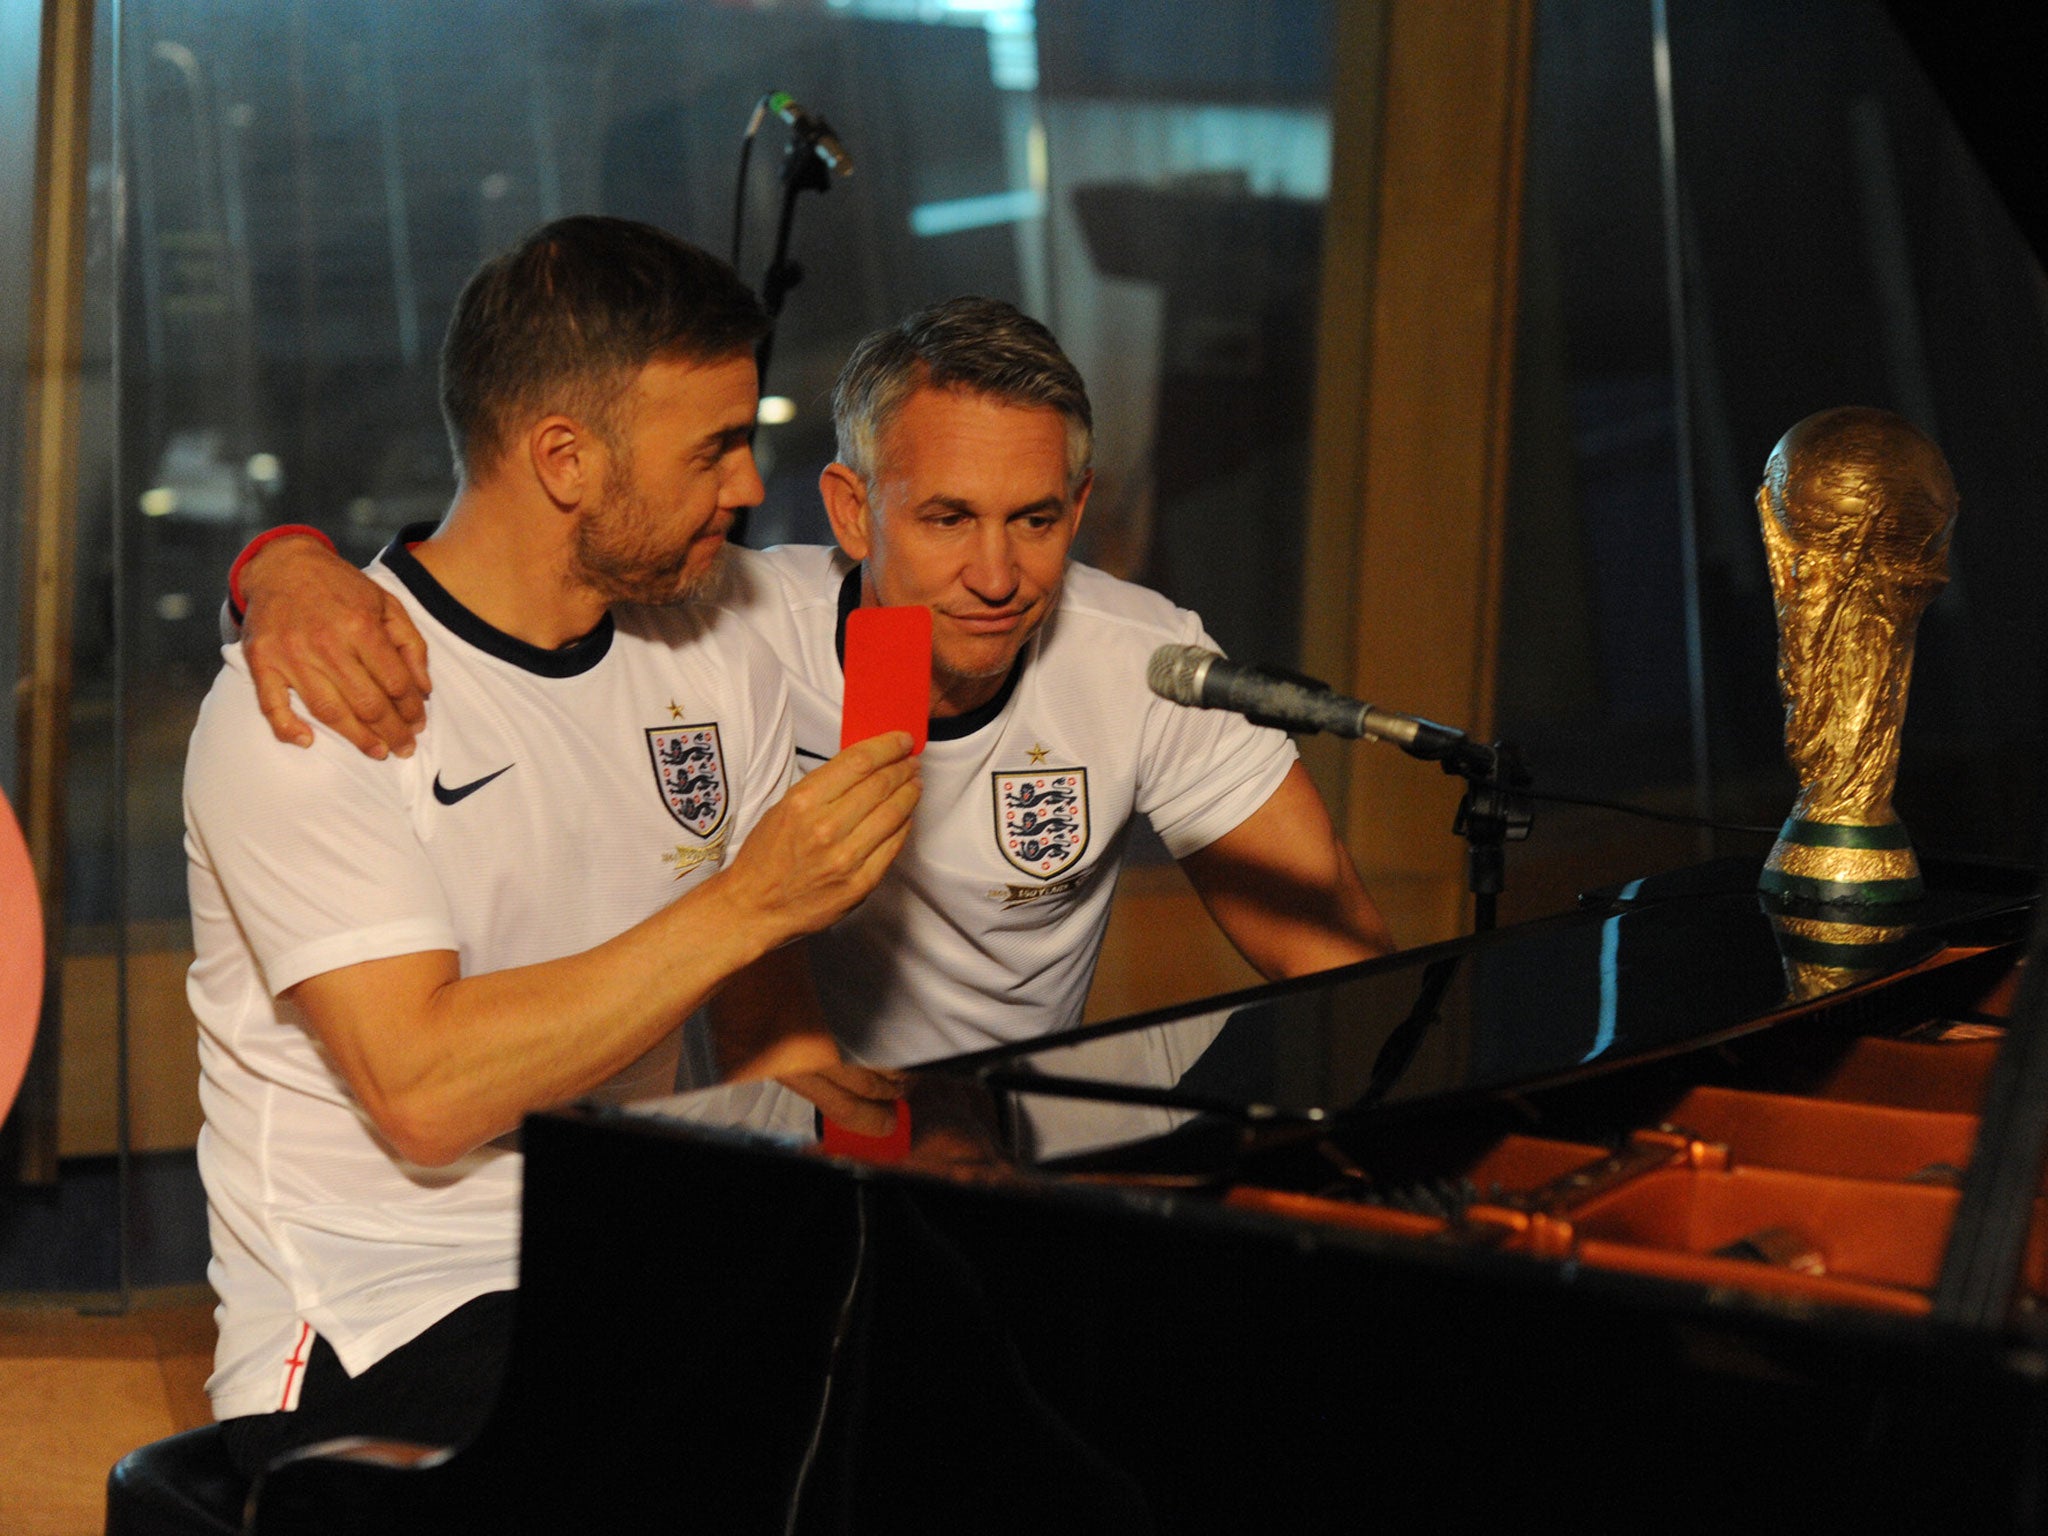 Gary Barlow and Gary Lineker lead the recording of the official England 2014 FIFA World Cup song